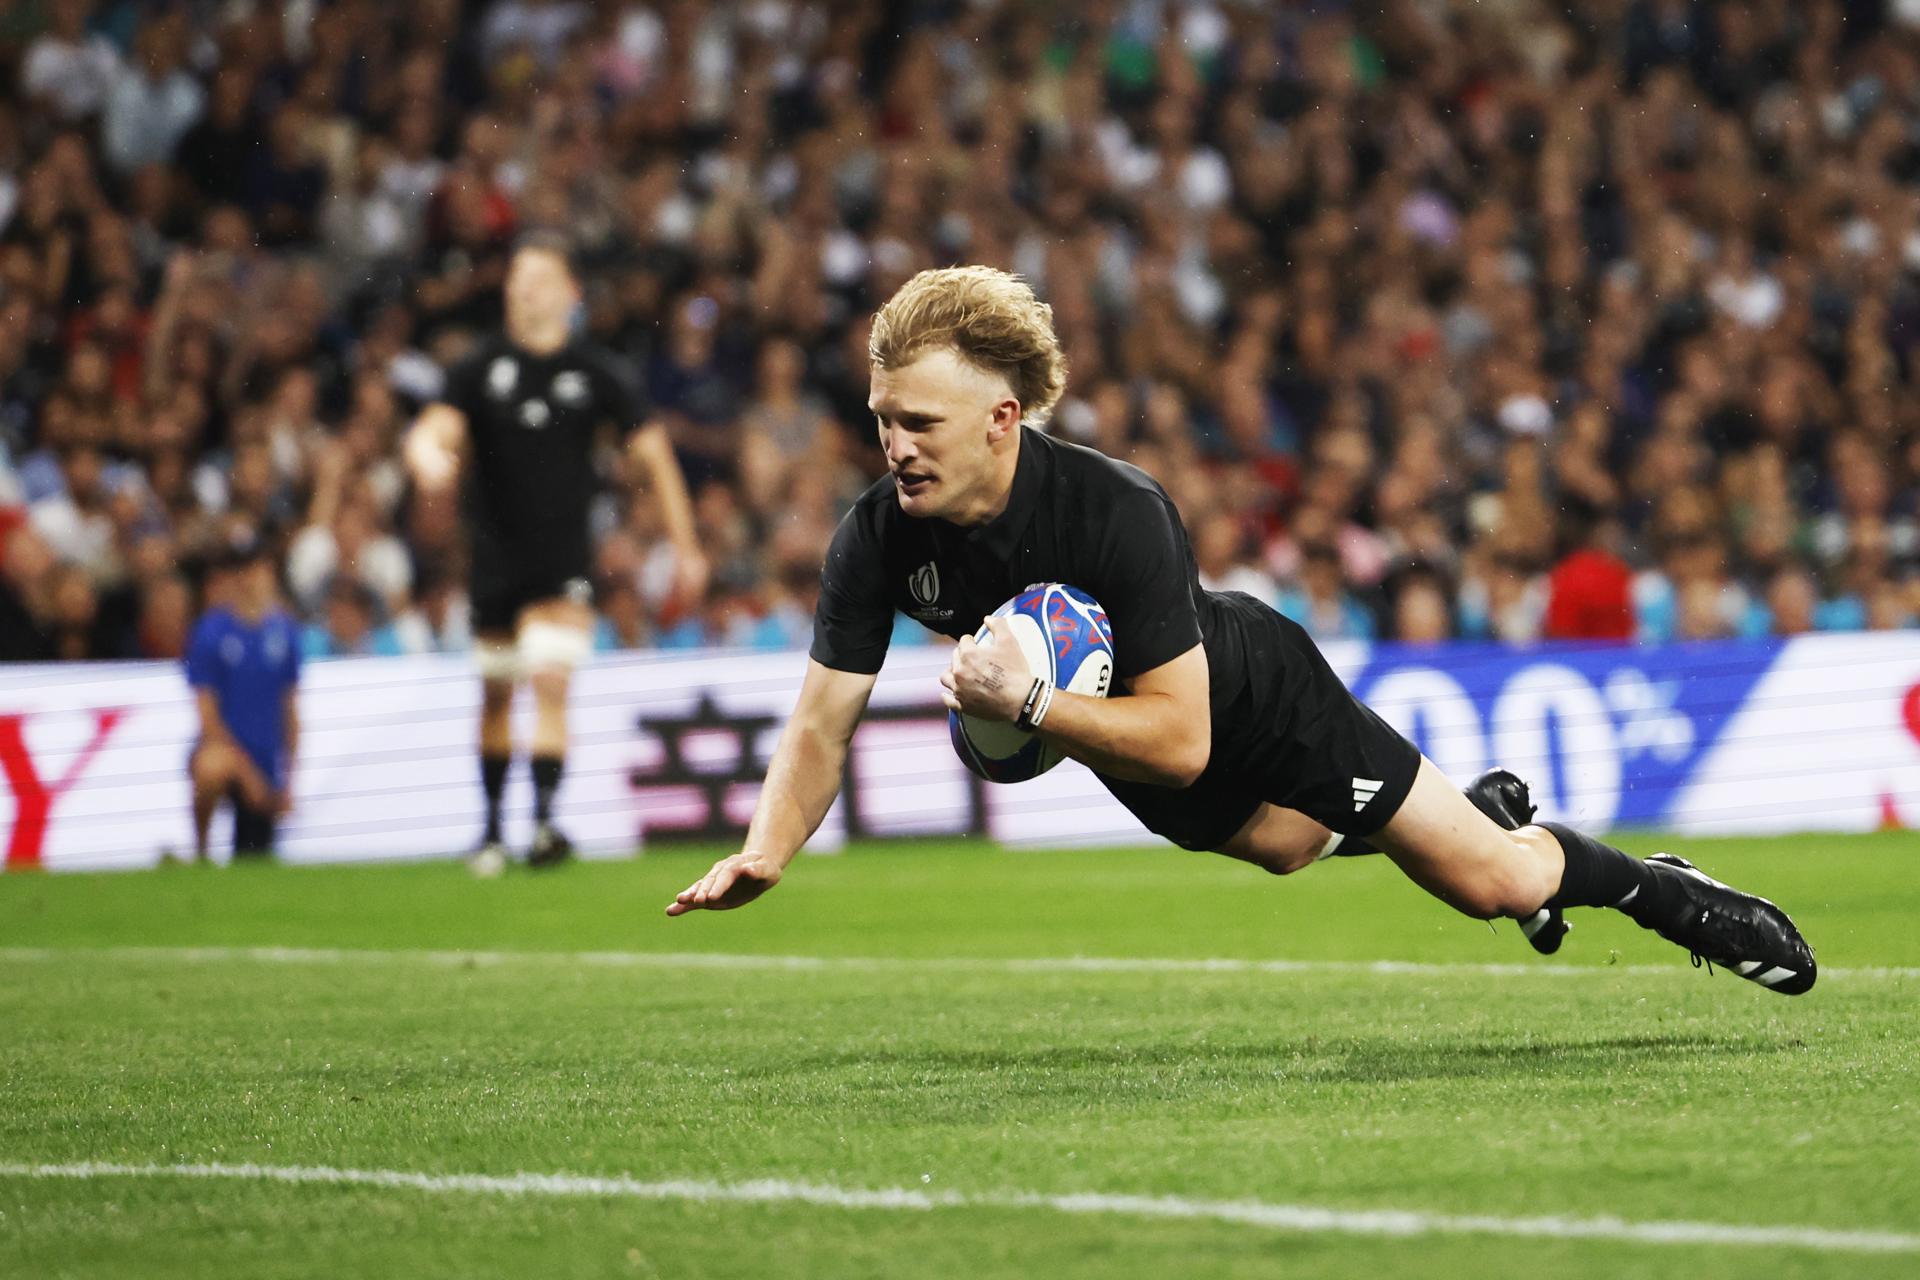 New Zealand's Damian McKenzie scores a try during the Rugby World Cup Pool A match between New Zealand and Namibia in Toulouse, France, 15 September 2023. EFE-EPA/GUILLAUME HORCAJUELO
